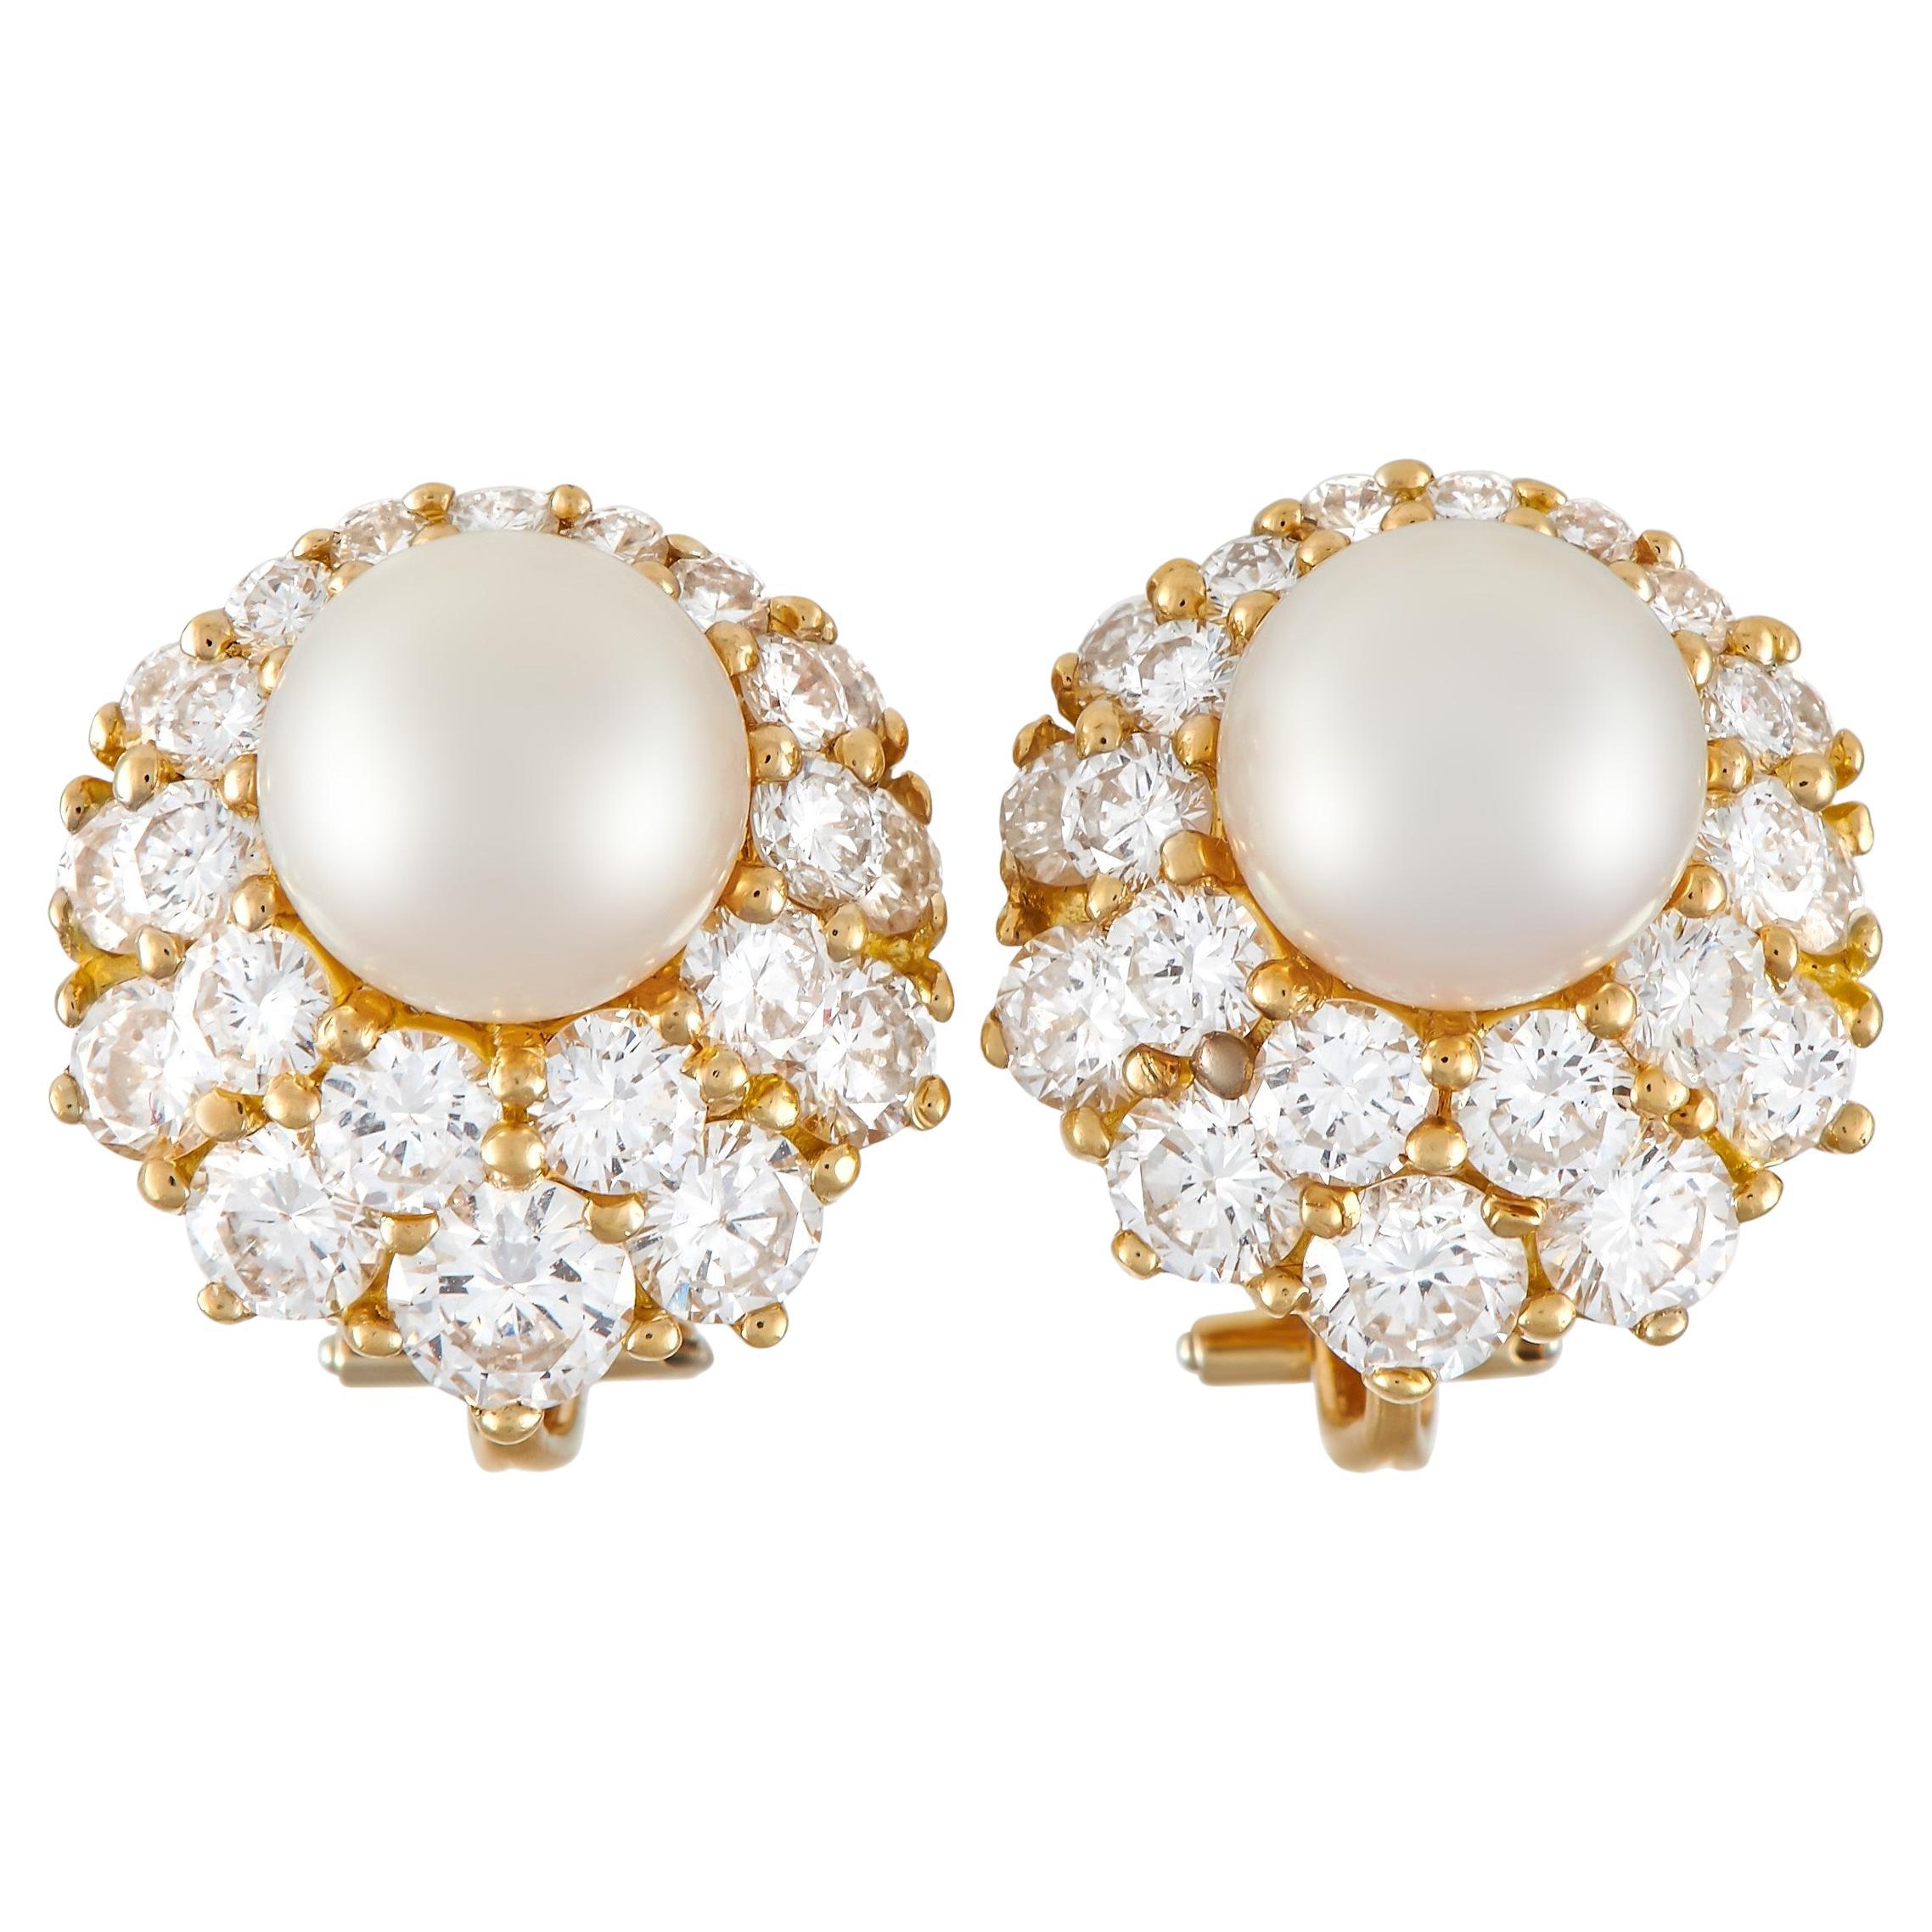 Harry Winston 18K Yellow Gold 3.70 Ct Diamond and Pearl Earrings